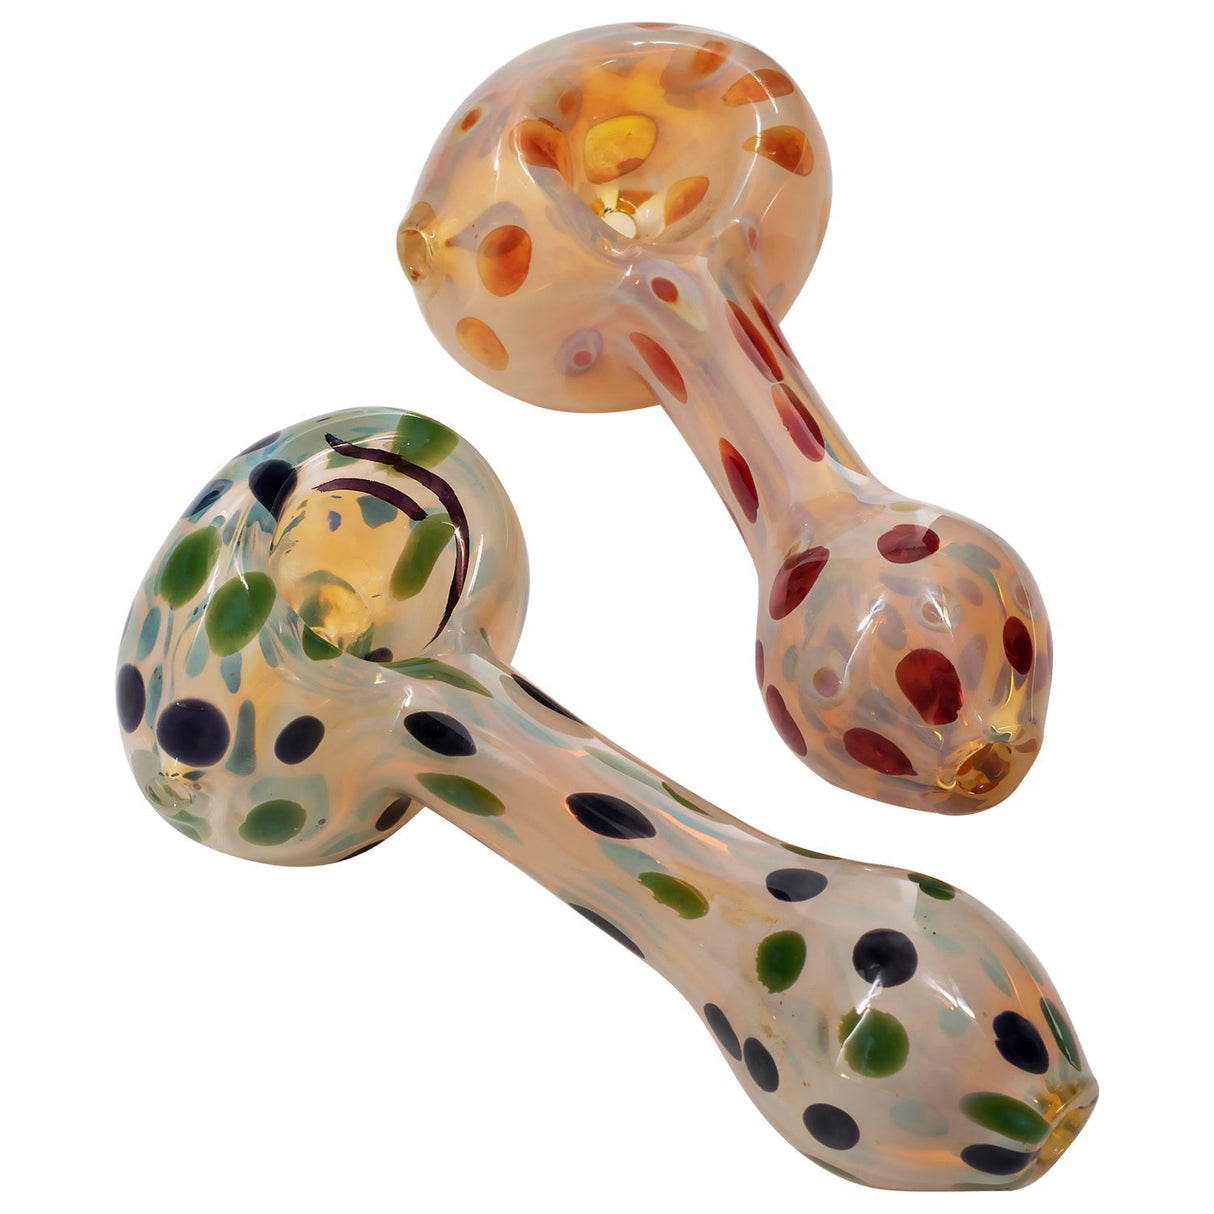 LA Pipes Polka Dot Glass Spoon Pipe in Assorted Colors, Borosilicate Glass, Made in USA